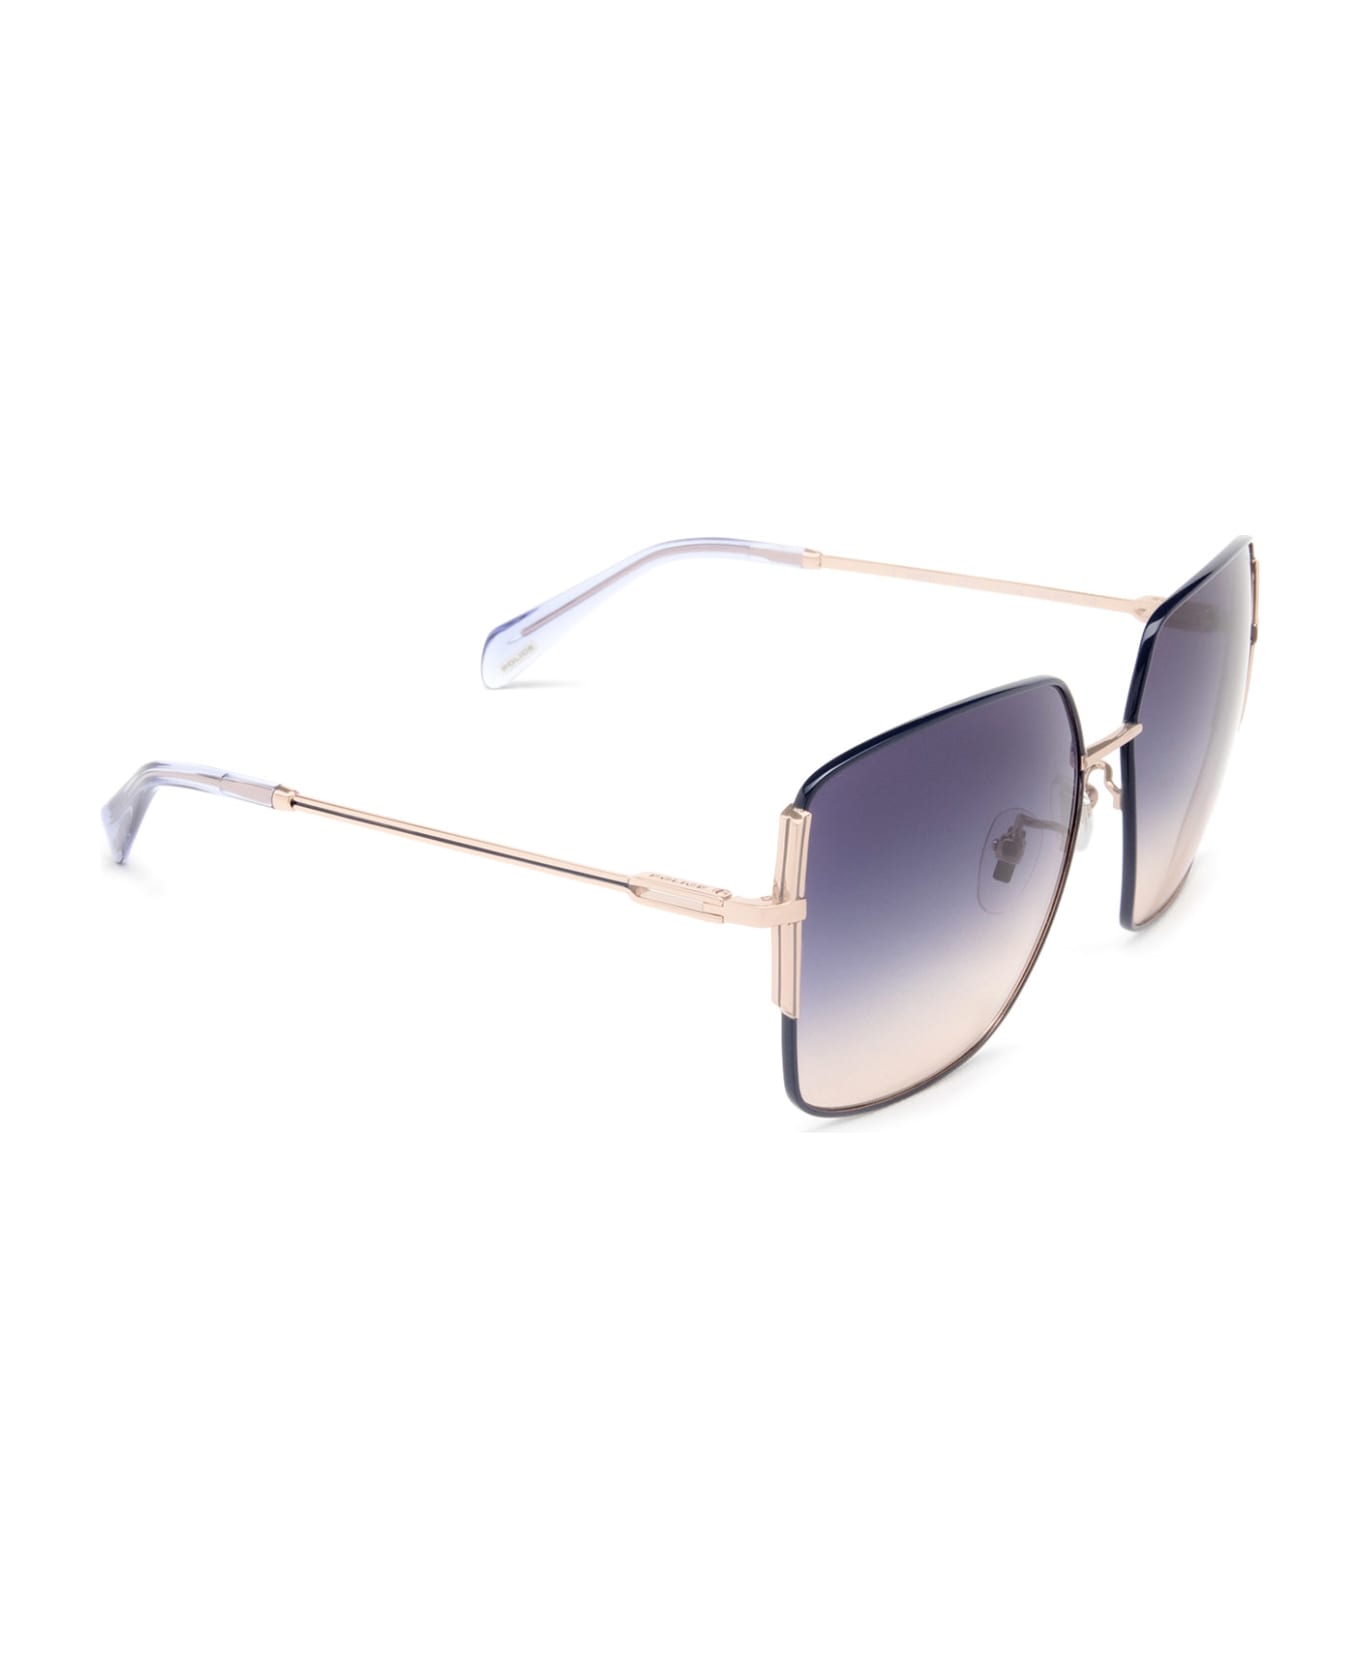 Police Splf34 Red Gold With Coloured Parts Sunglasses - Red Gold With Coloured Parts サングラス